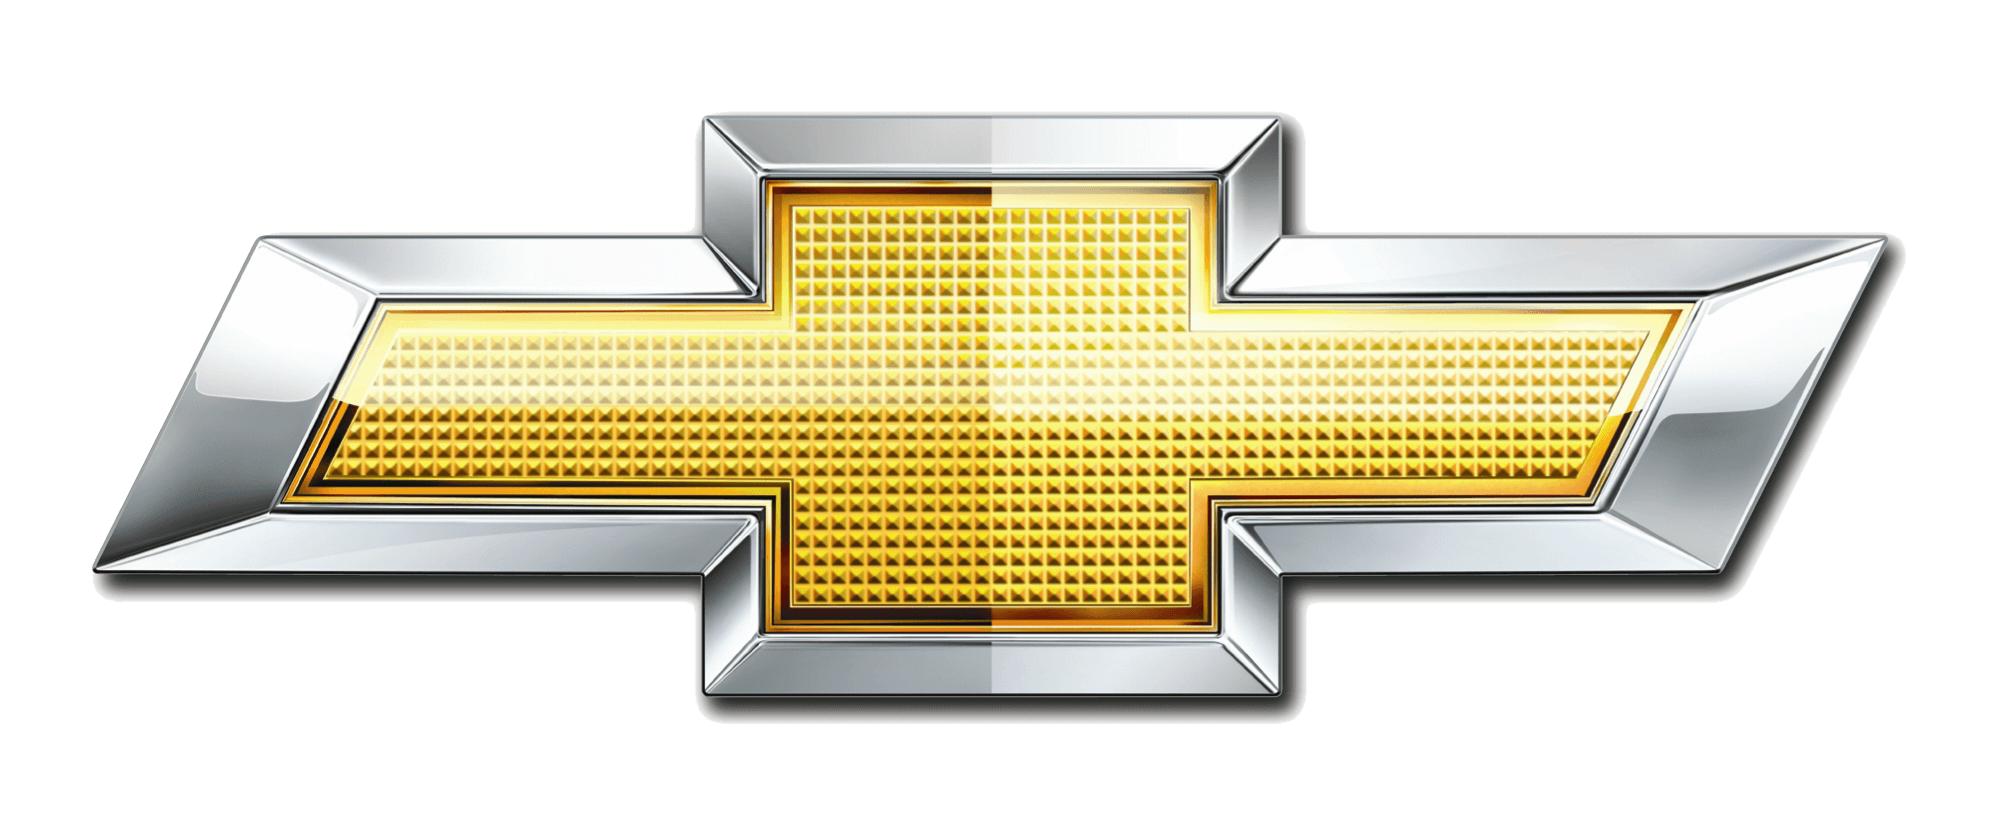 Chevrolet Logo - Chevrolet Logo, Chevy Meaning and History | World Cars Brands